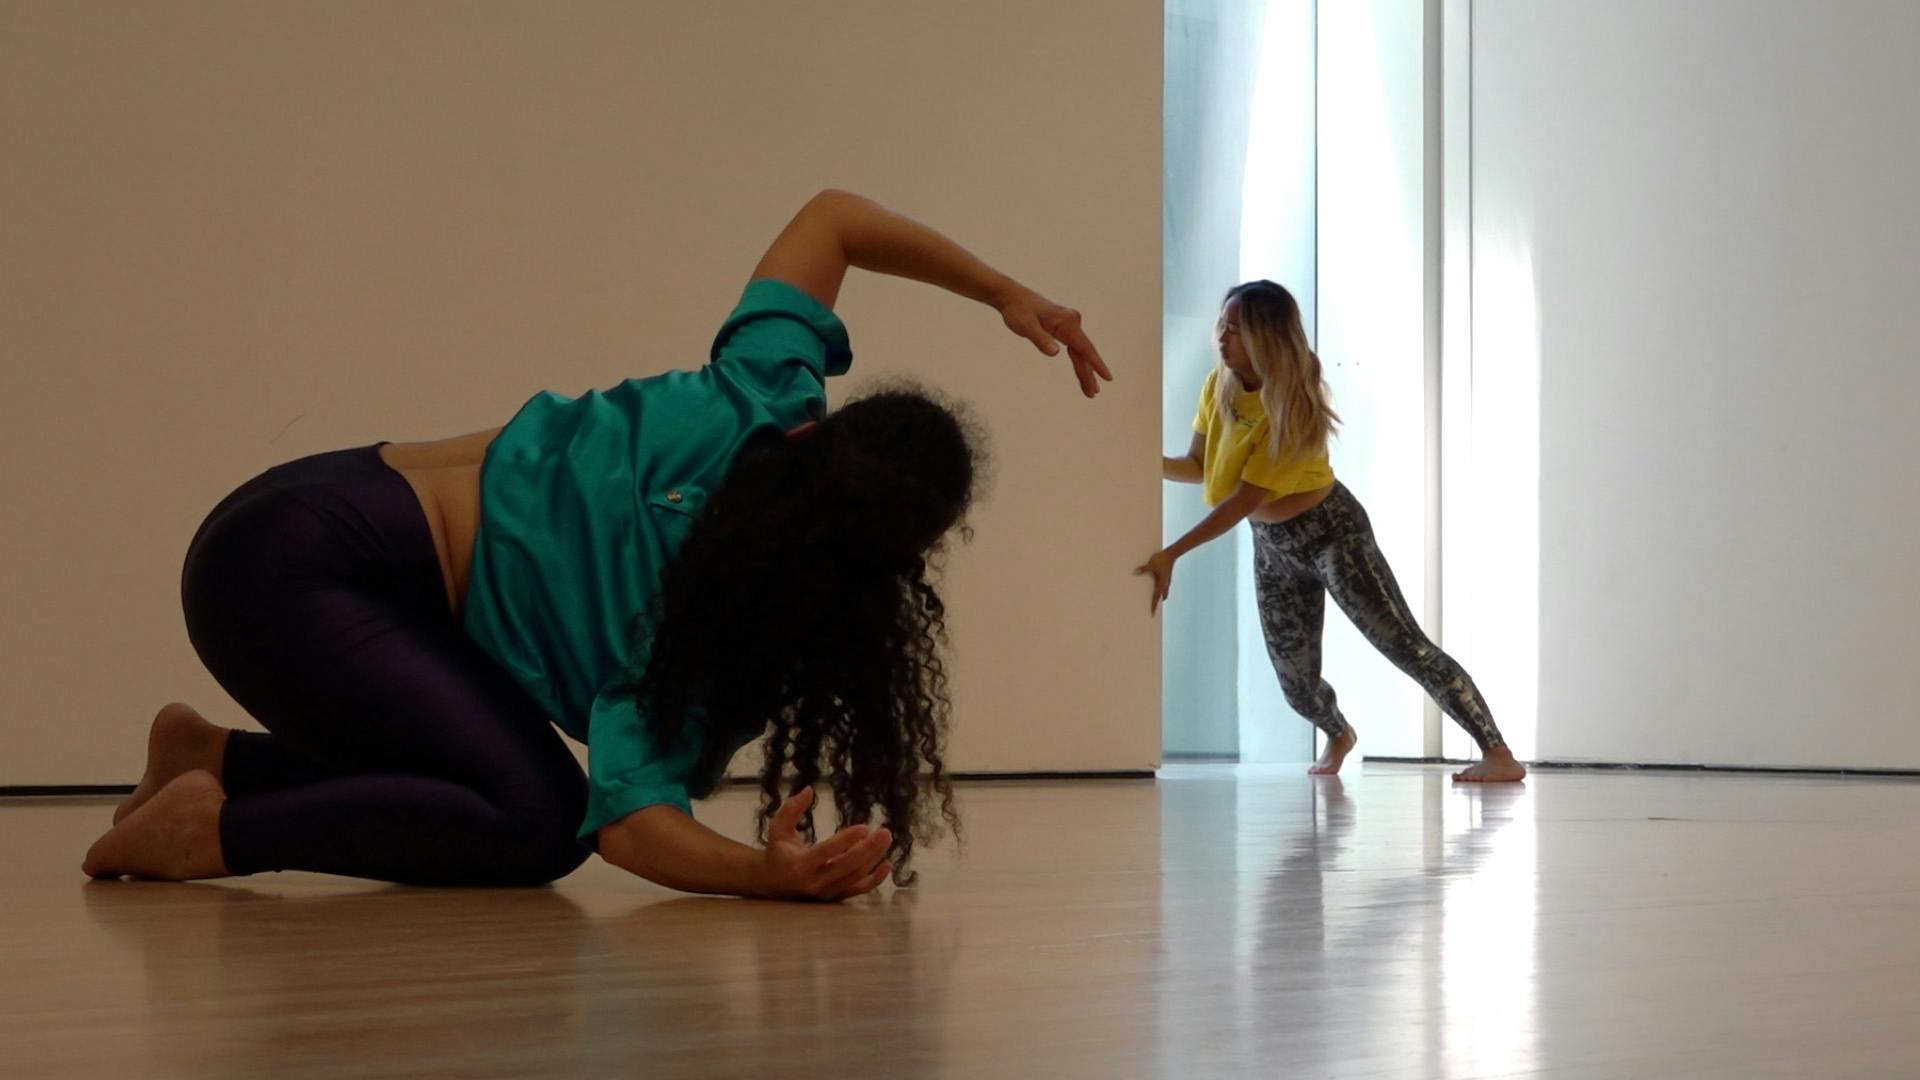 A video still of two dancers performing in a studio space. In the foreground, a dancer is crouched on their knees with one arm sweeping overhead. In the background, a dancer is holding the corner of a wall, leaning forward with their feet planted.